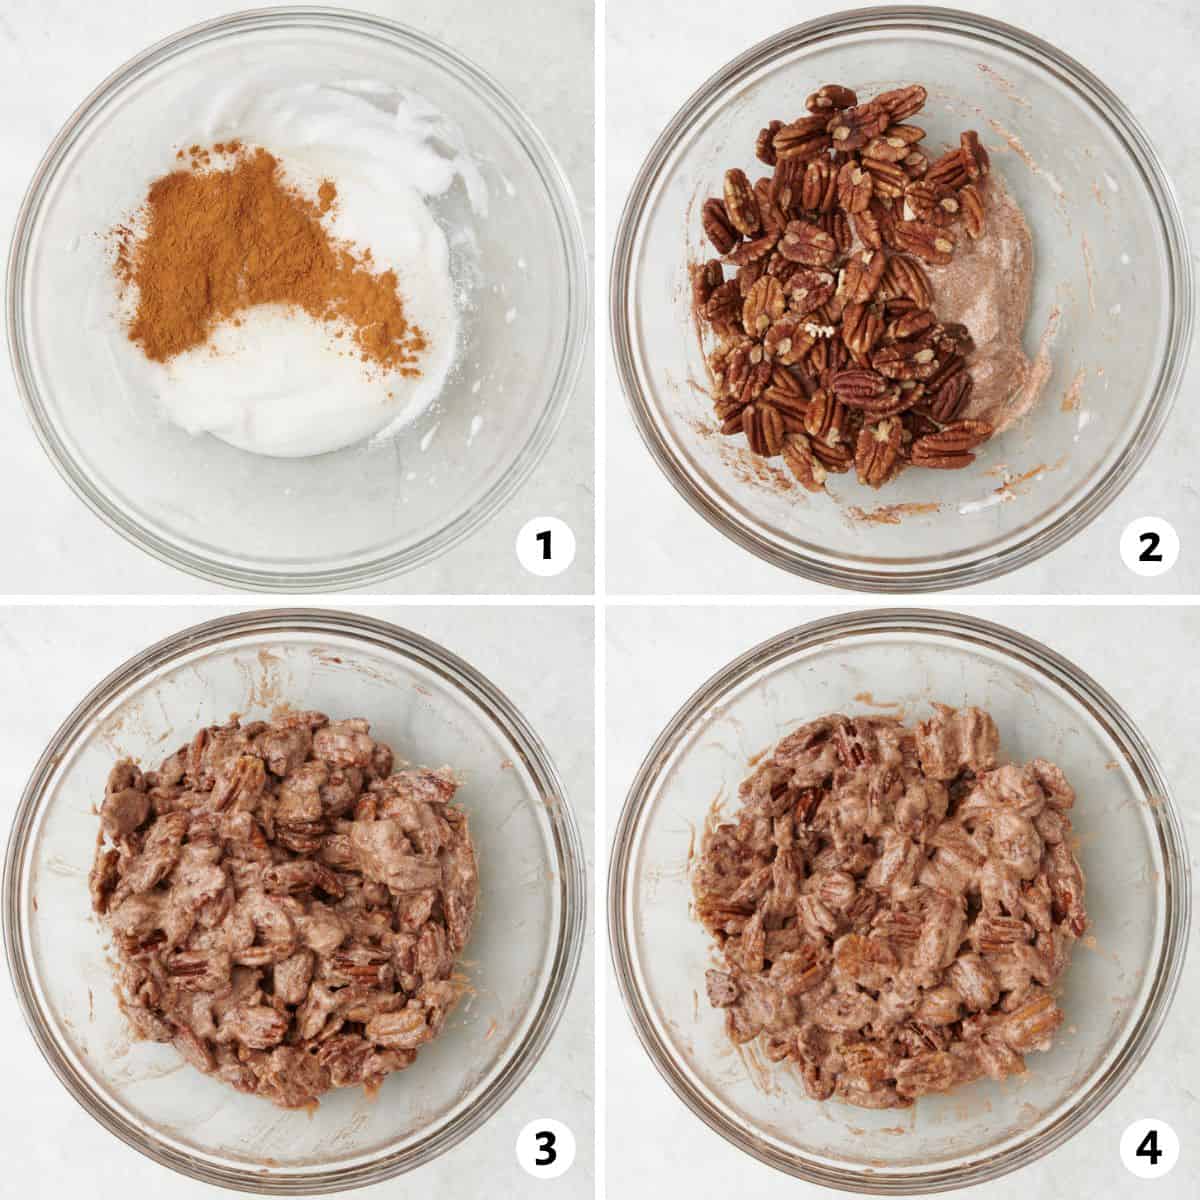 4 image collage preparing recipe for baking: 1- whipped egg whites in a bowl with cinnamon, sugar, and salt before combining, 2- after combined with pecan halves added on top, 3- after folding together with melted butter added, 4- after evenly tossed together.